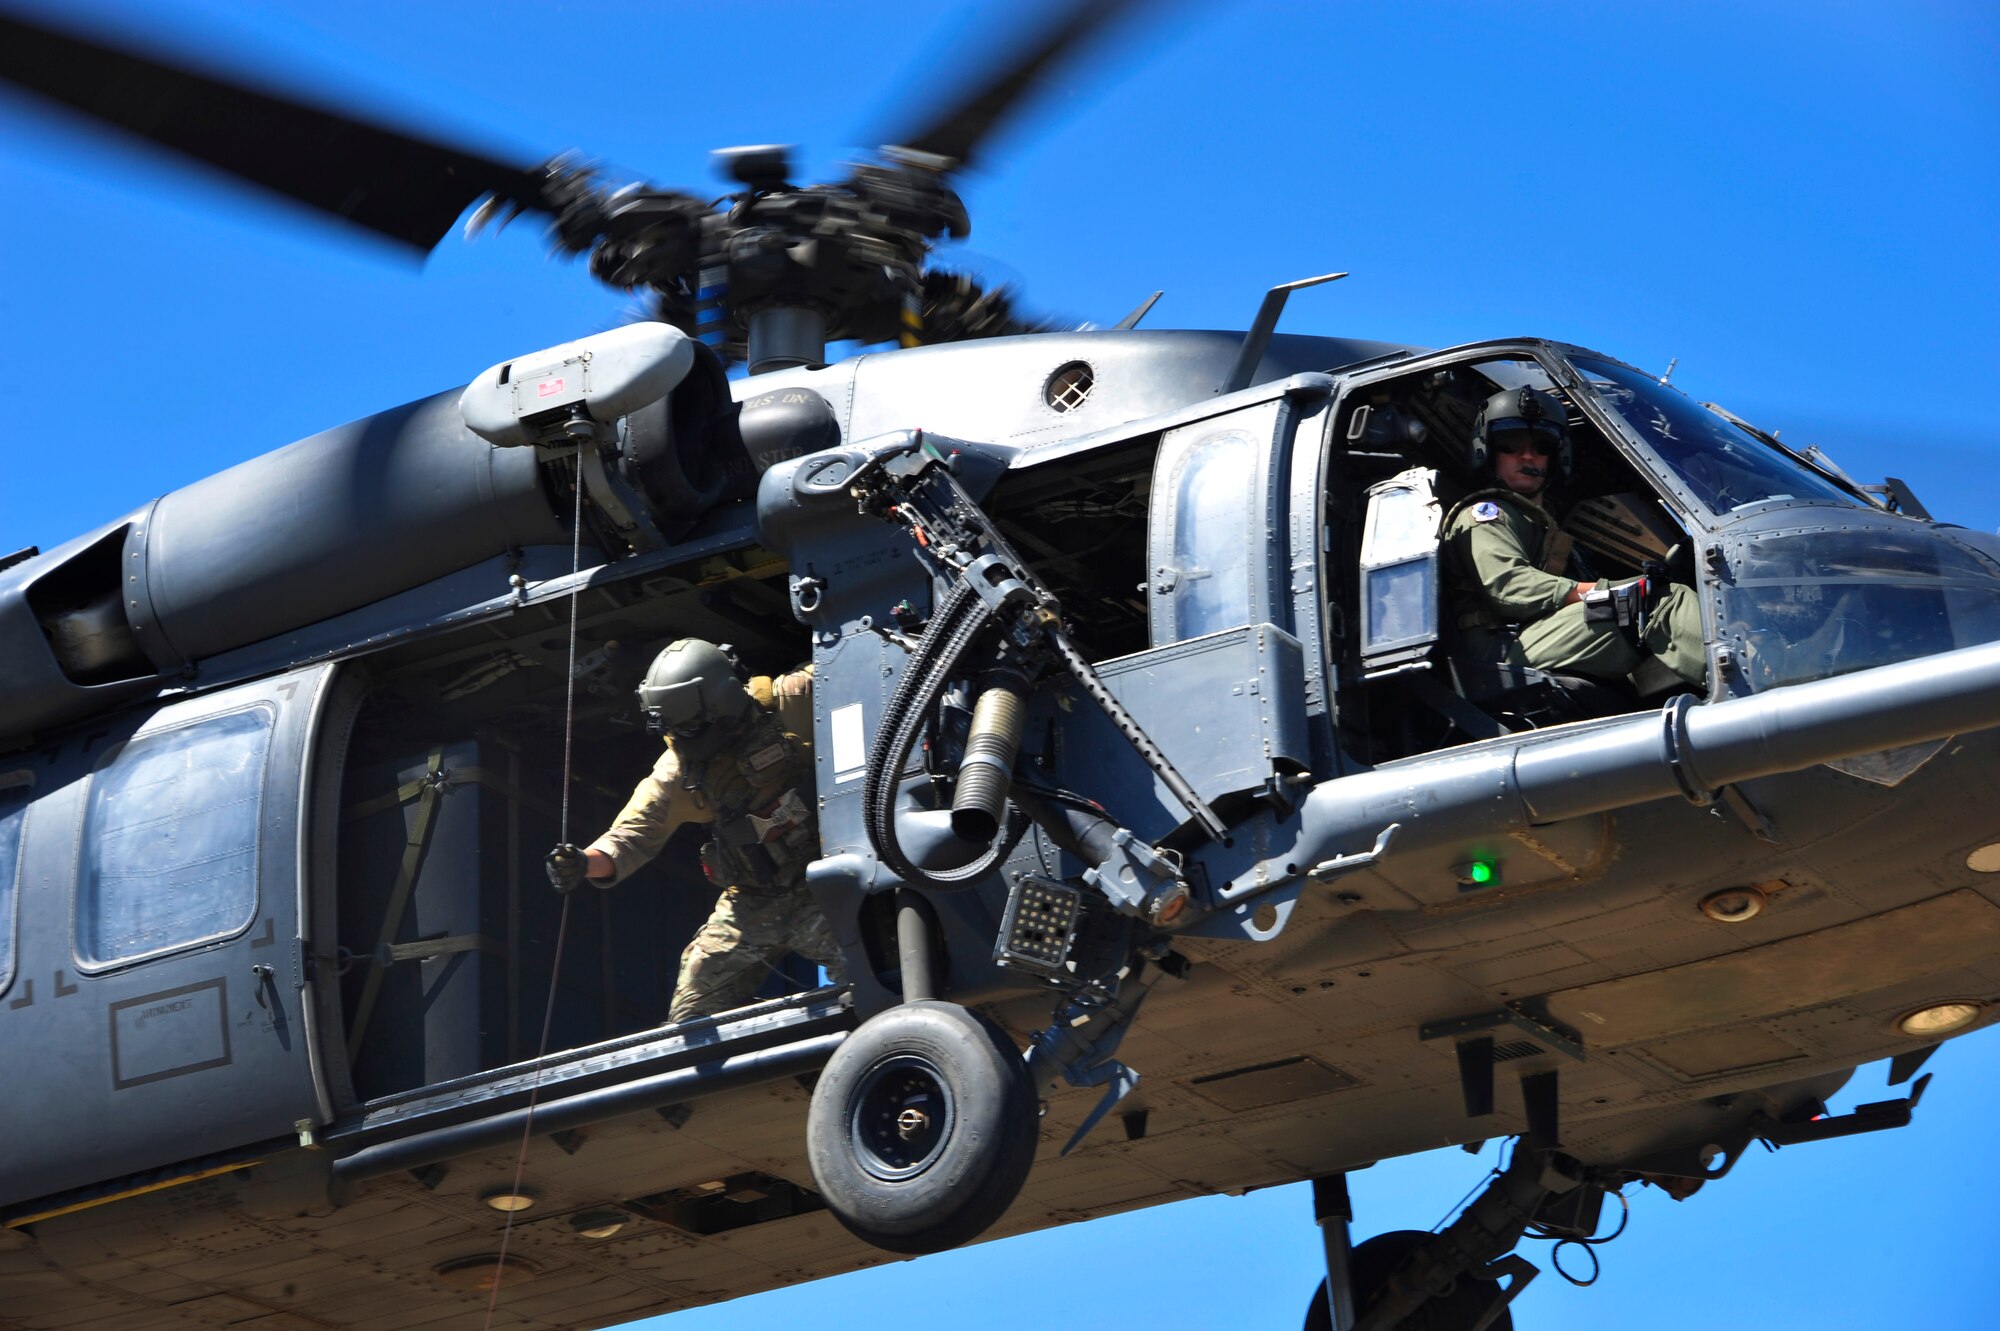 Members from the 55th Rescue Squadron hoist a simulated down pilot off the ground into an HH-60G Pave Hawk during a search and rescue exercise at Outlaw/Jackal military operations area in southeastern Ariz., Sept. 15, 2016. During the exercise, rescue assets remained in constant communication with the downed pilot to execute a successful extraction. (U.S. Air Force photo by Senior Airman Cheyenne A. Powers)